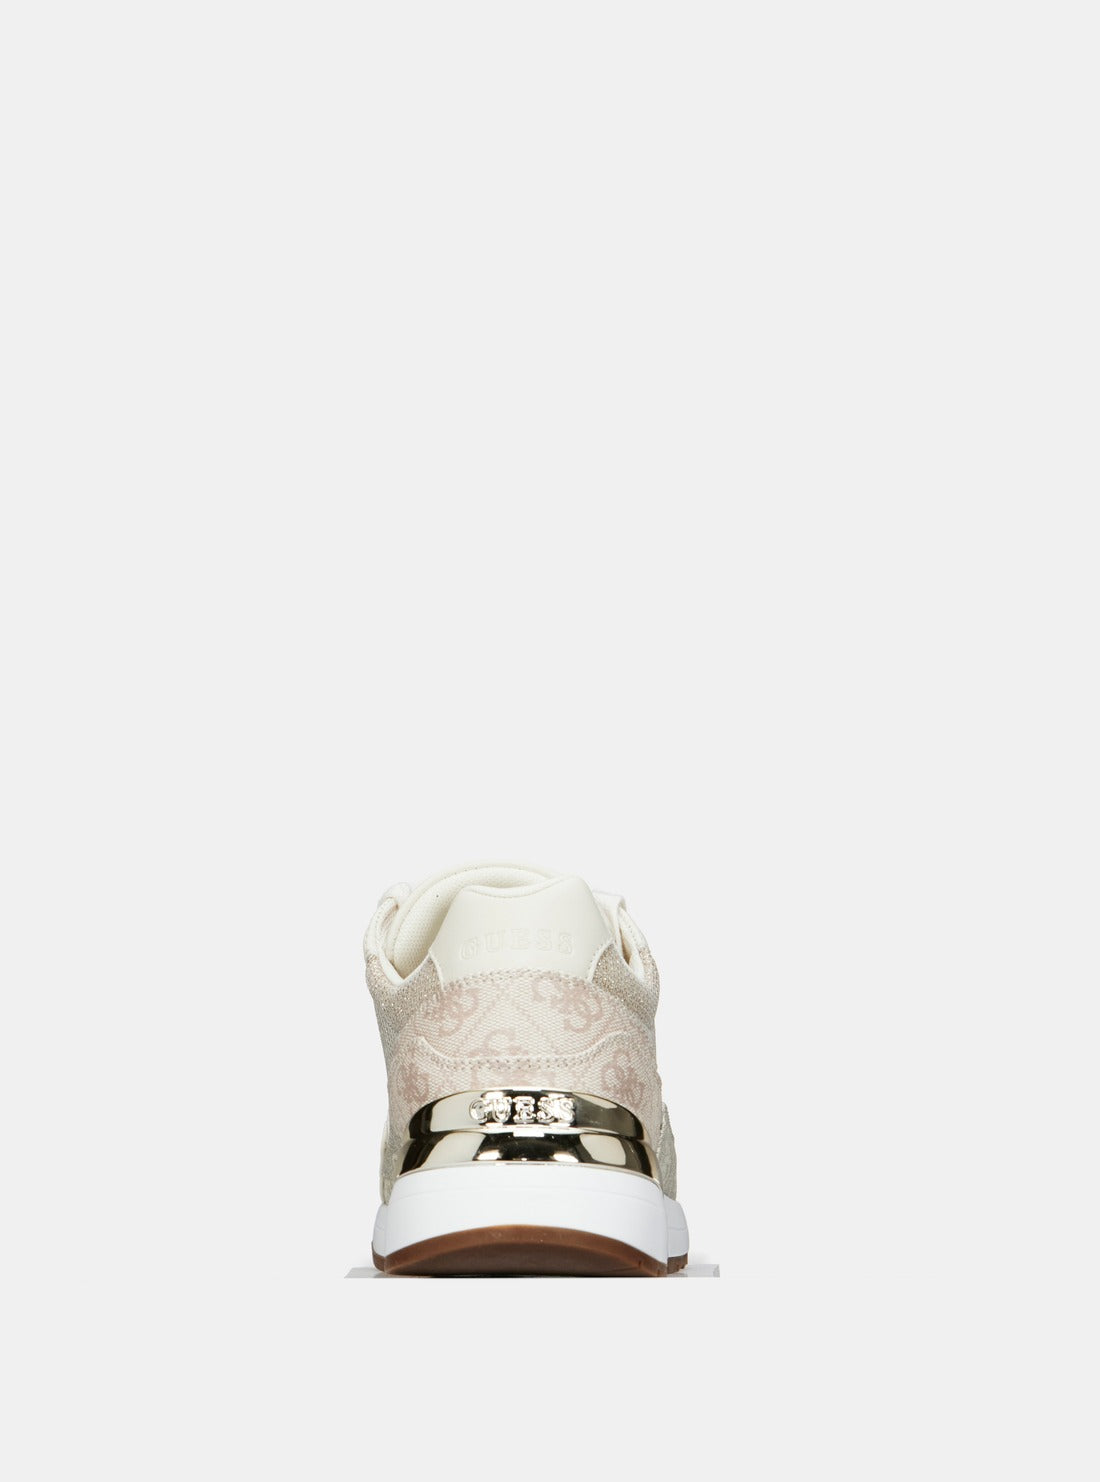 GUESS Cream Logo Low-Top Sneakers back view